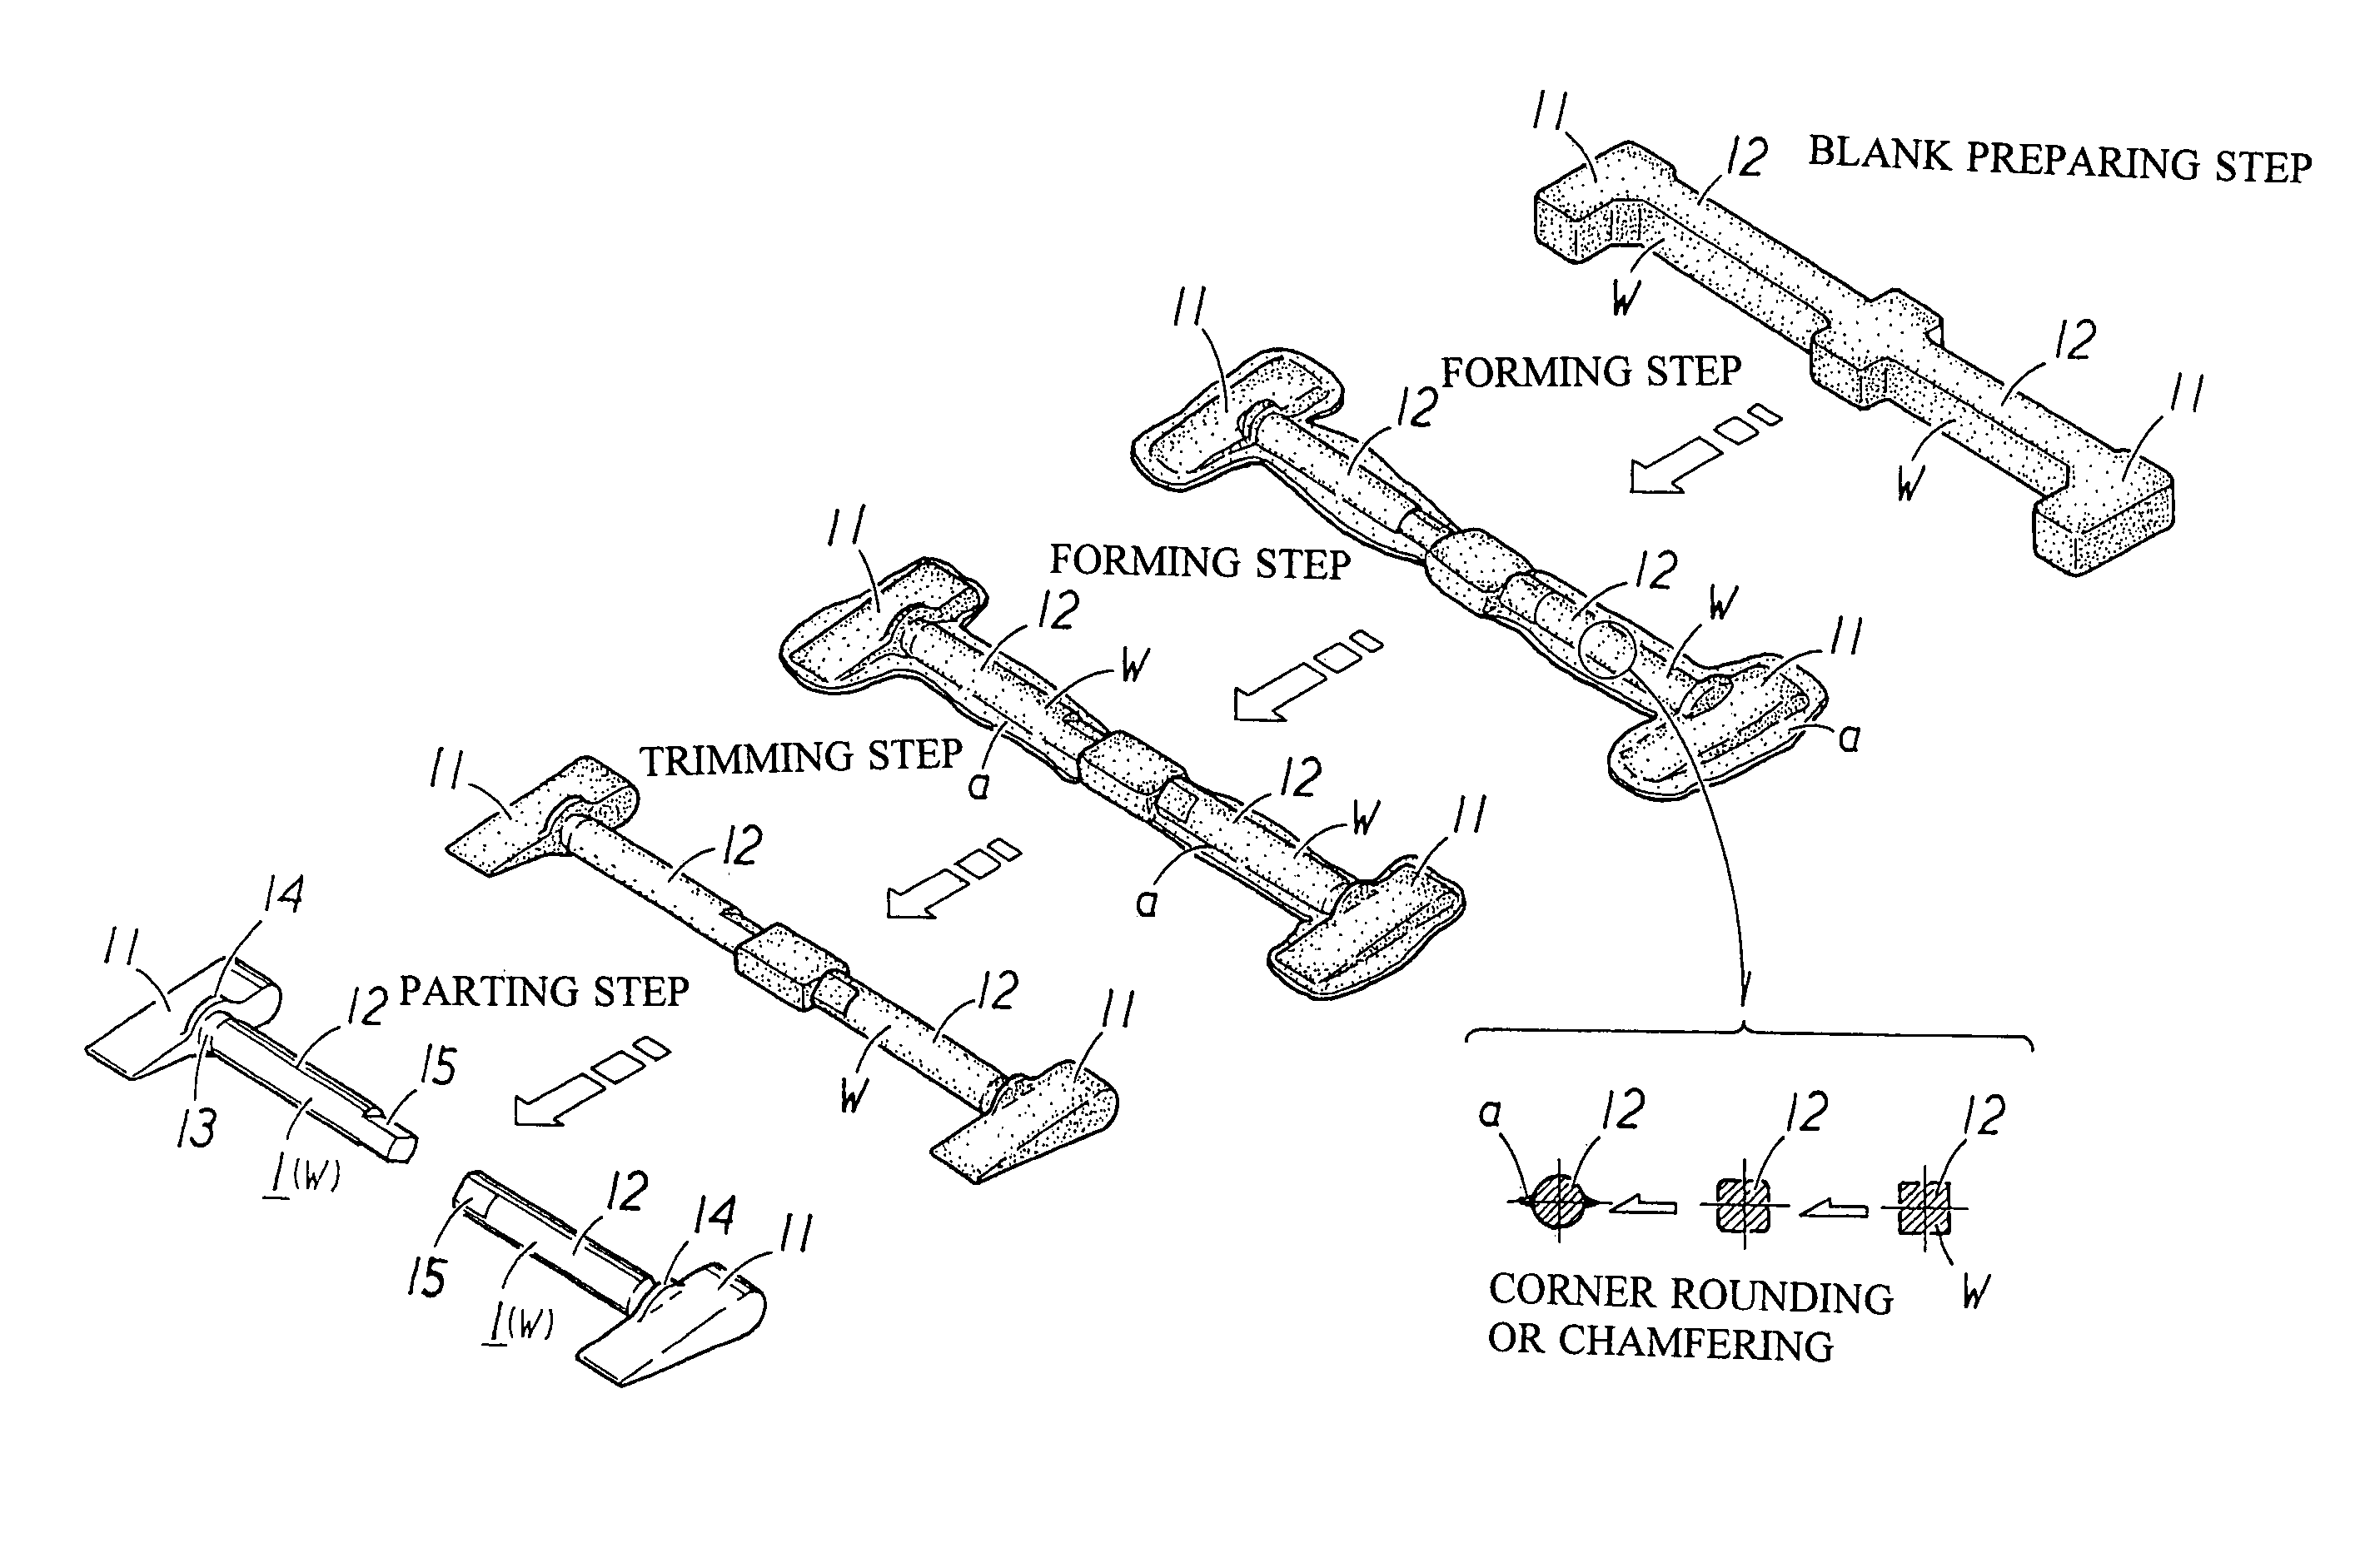 Variable blade manufacturing method and variable blade in VGS type turbo charger